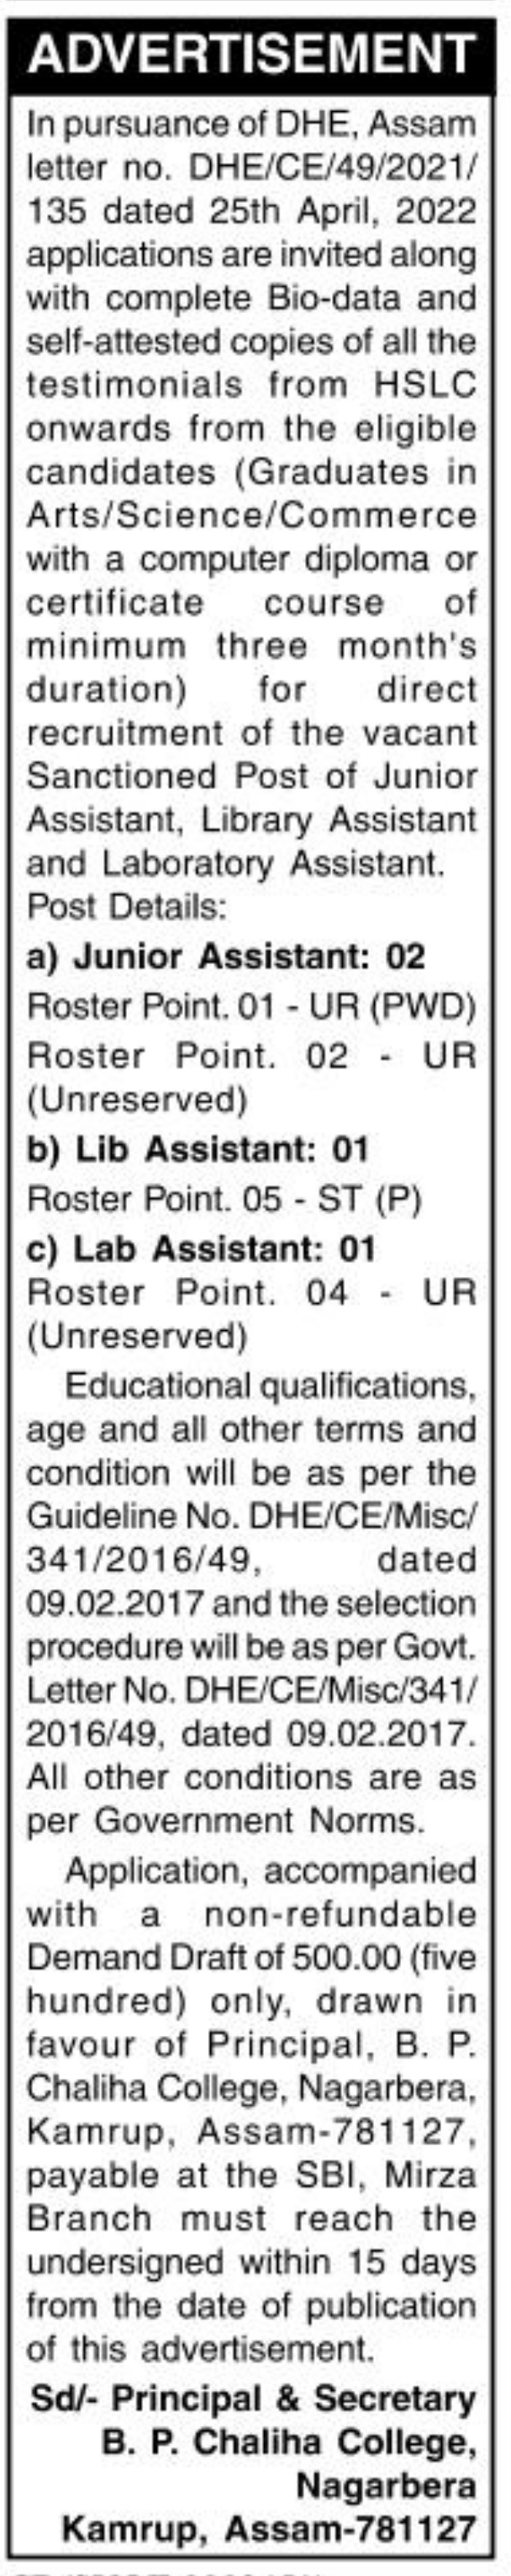 BP Chaliha College Recruitment - 04 Junior Assistant and Library Assistant posts